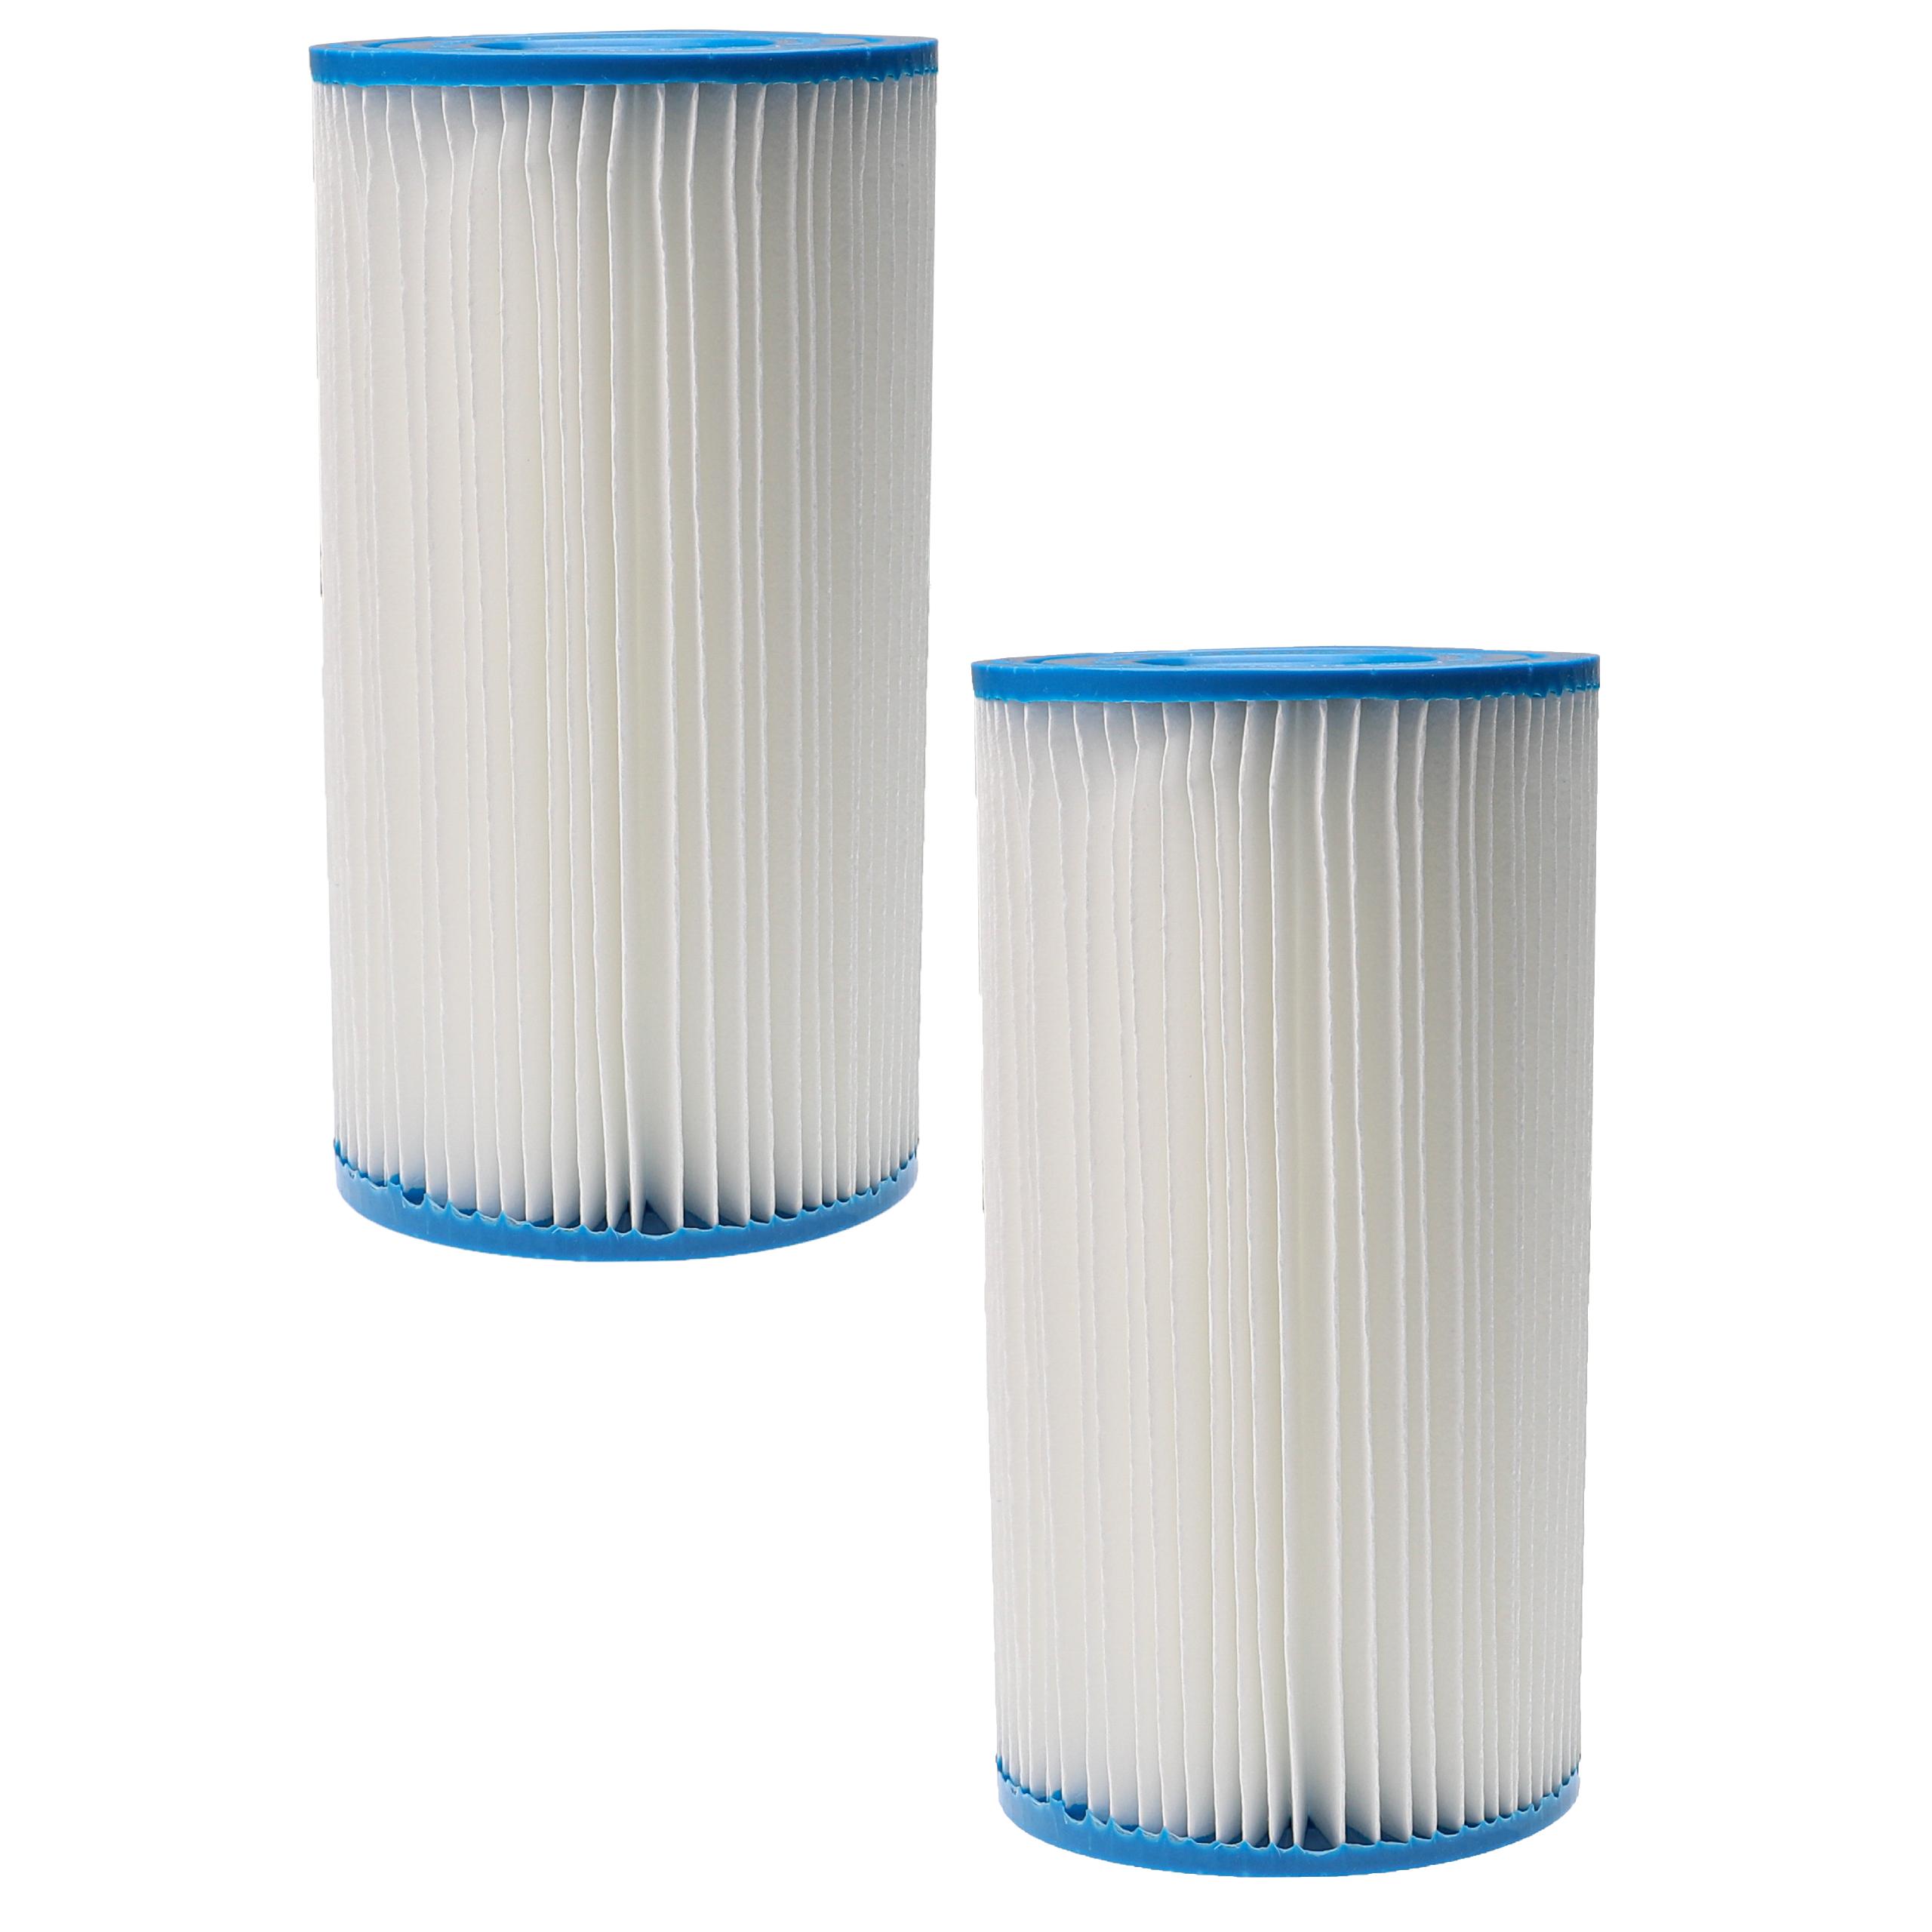 2x Water Filter replaces Intex filter type A for Intex Swimming Pool & Pump - Filter Cartridge